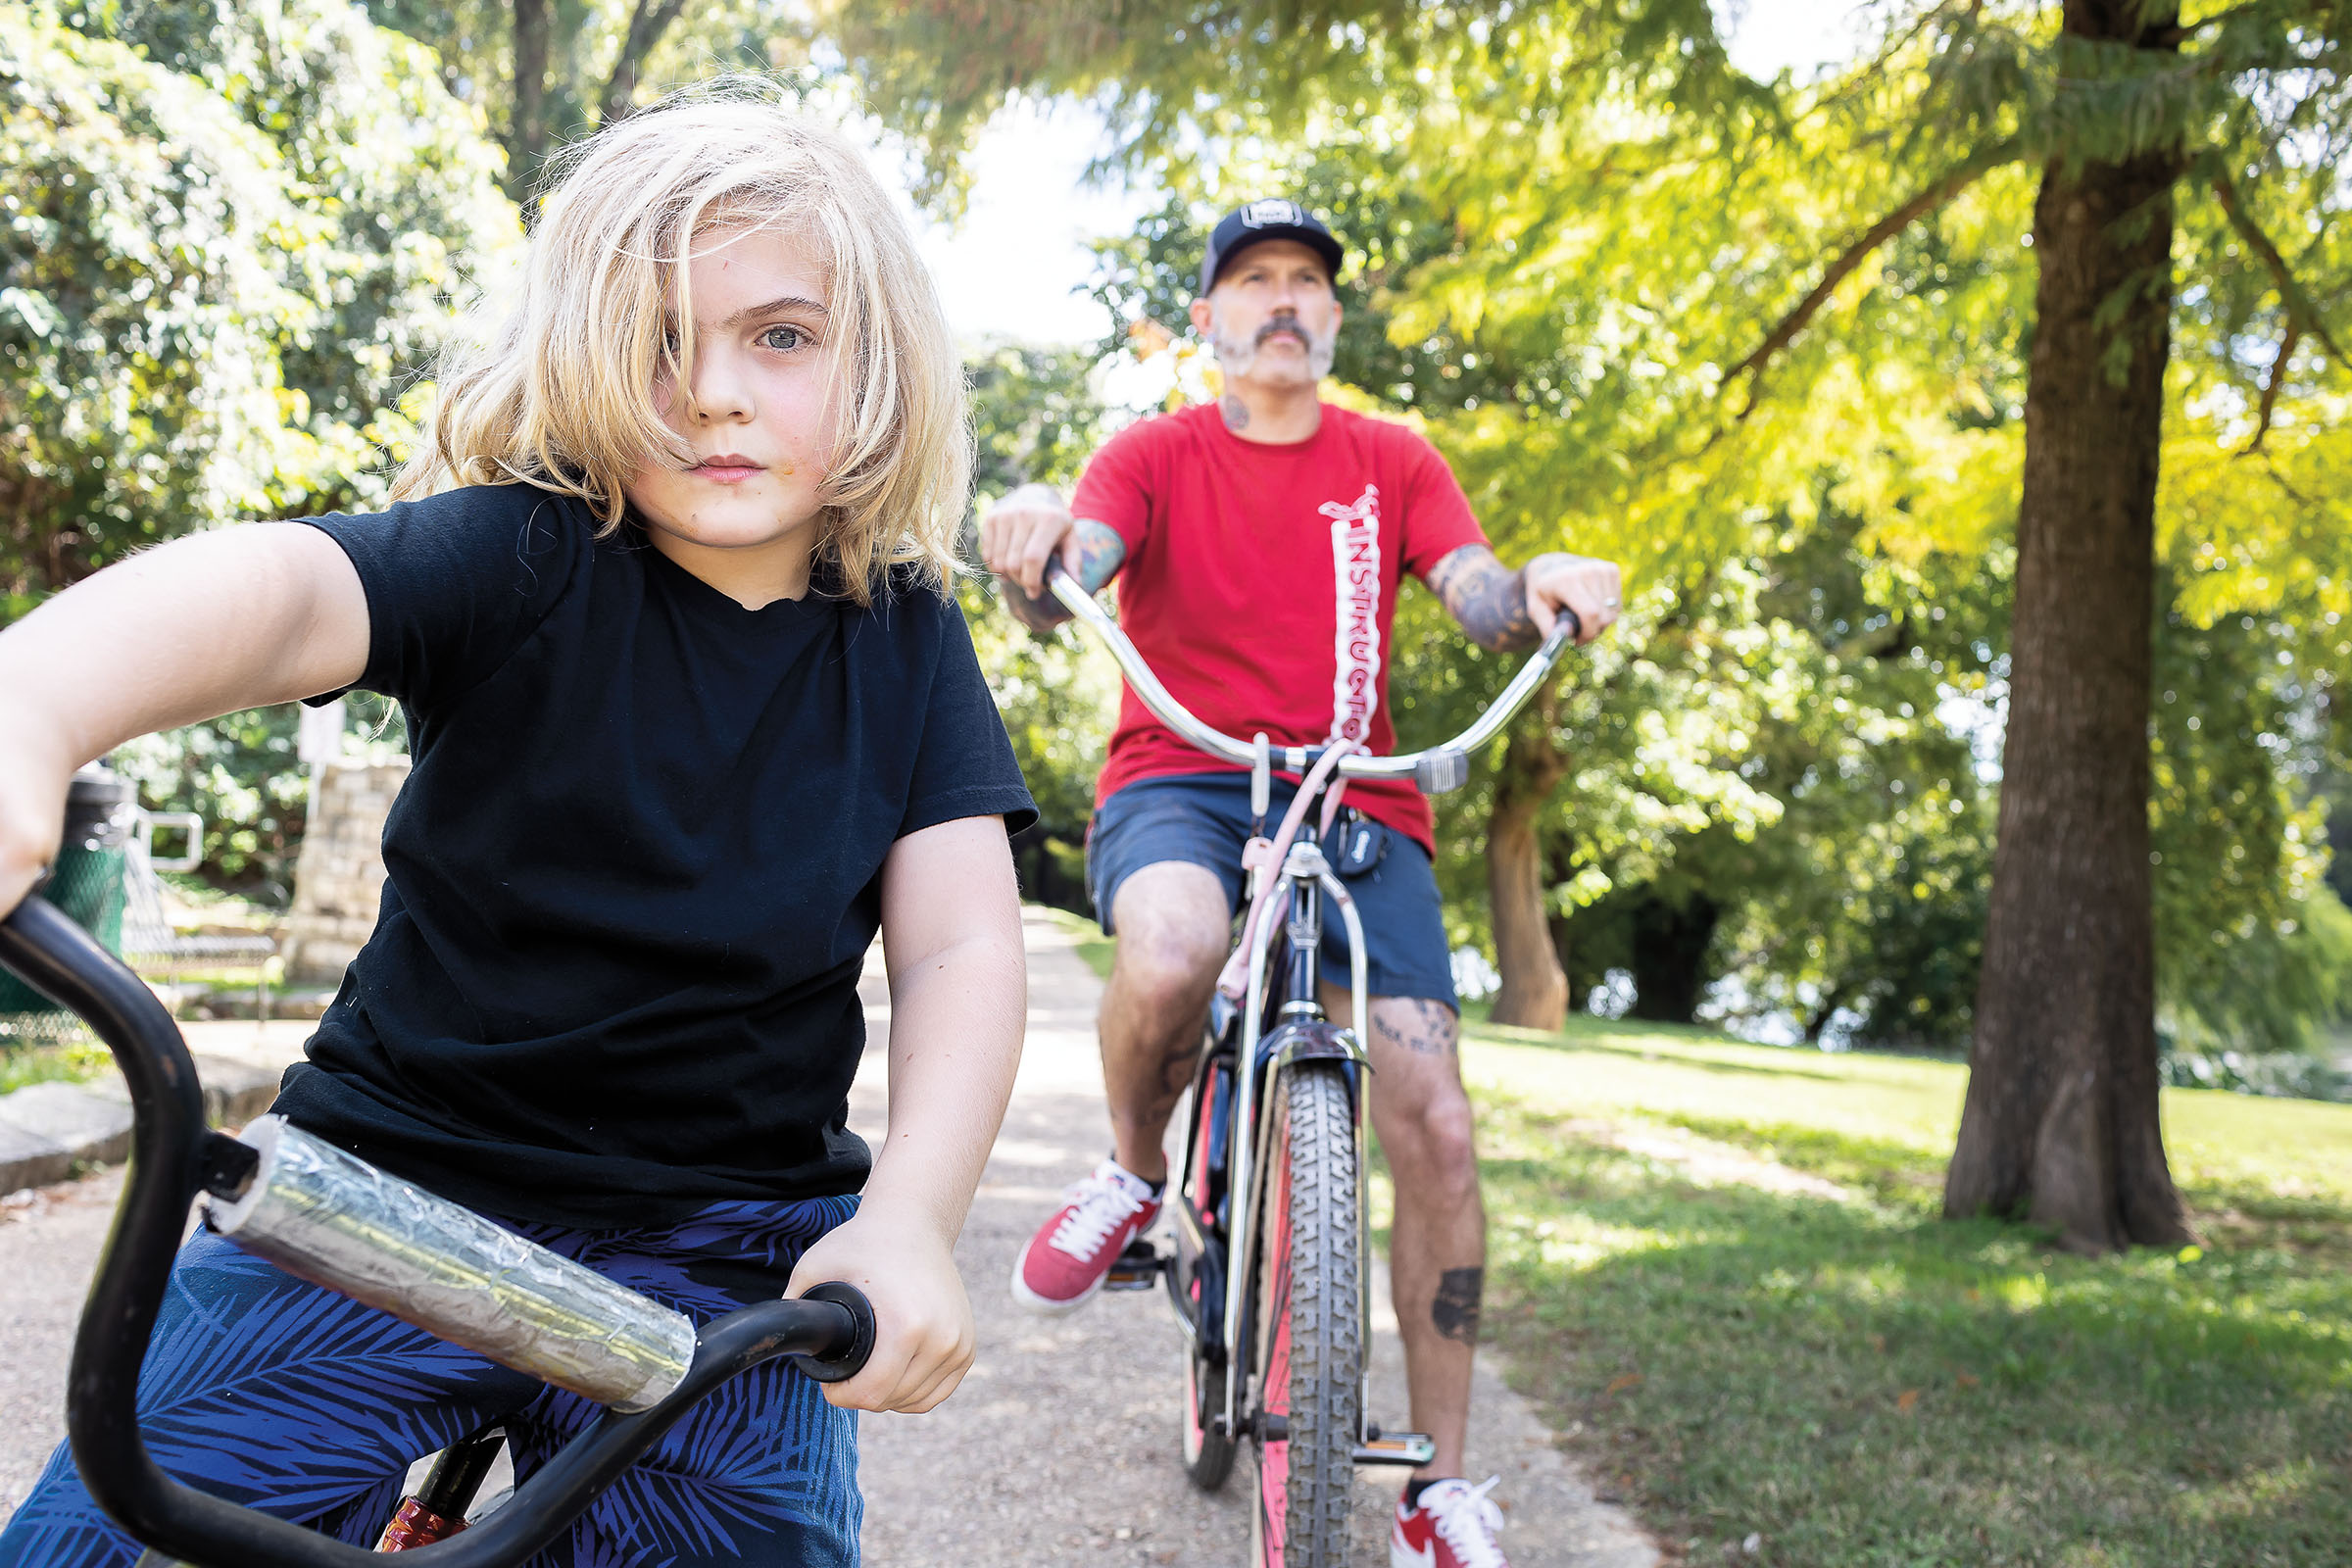 A young person with long blonde hair looks at the camera from their bike while a man on a larger bike in a red shirt looks off into the distance